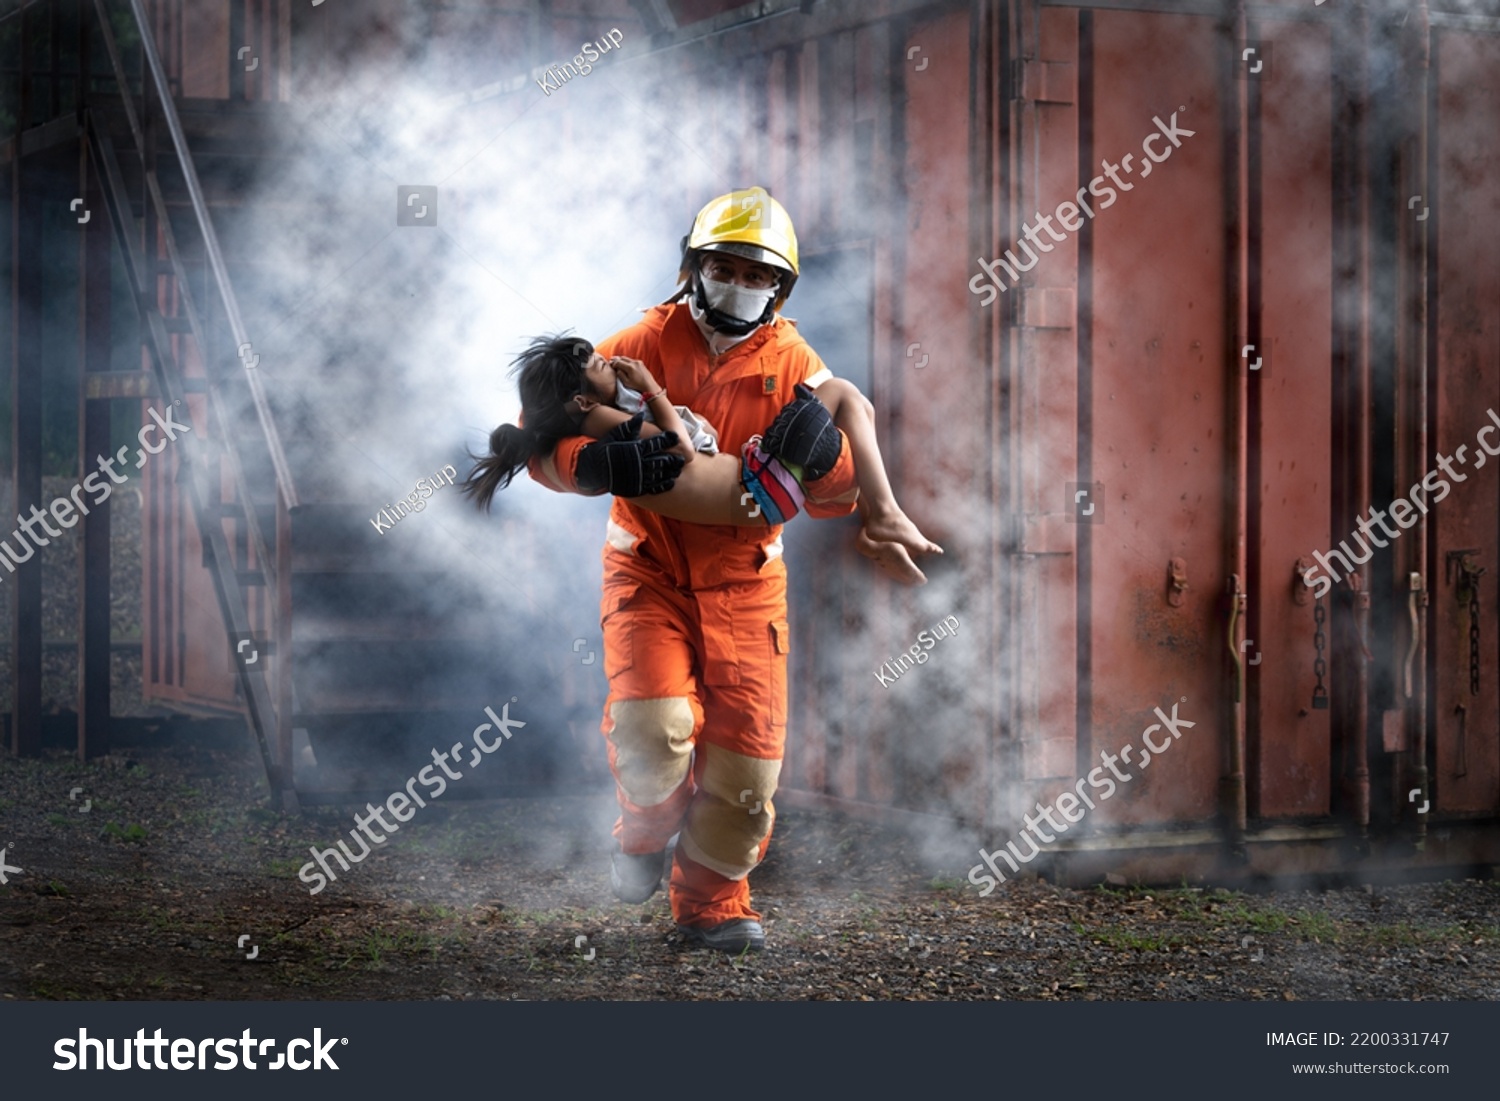 Firefighter man help Asian little girl from out container with smoke from fire.Firefighter rescue team training help people from fire accident simulation. #2200331747